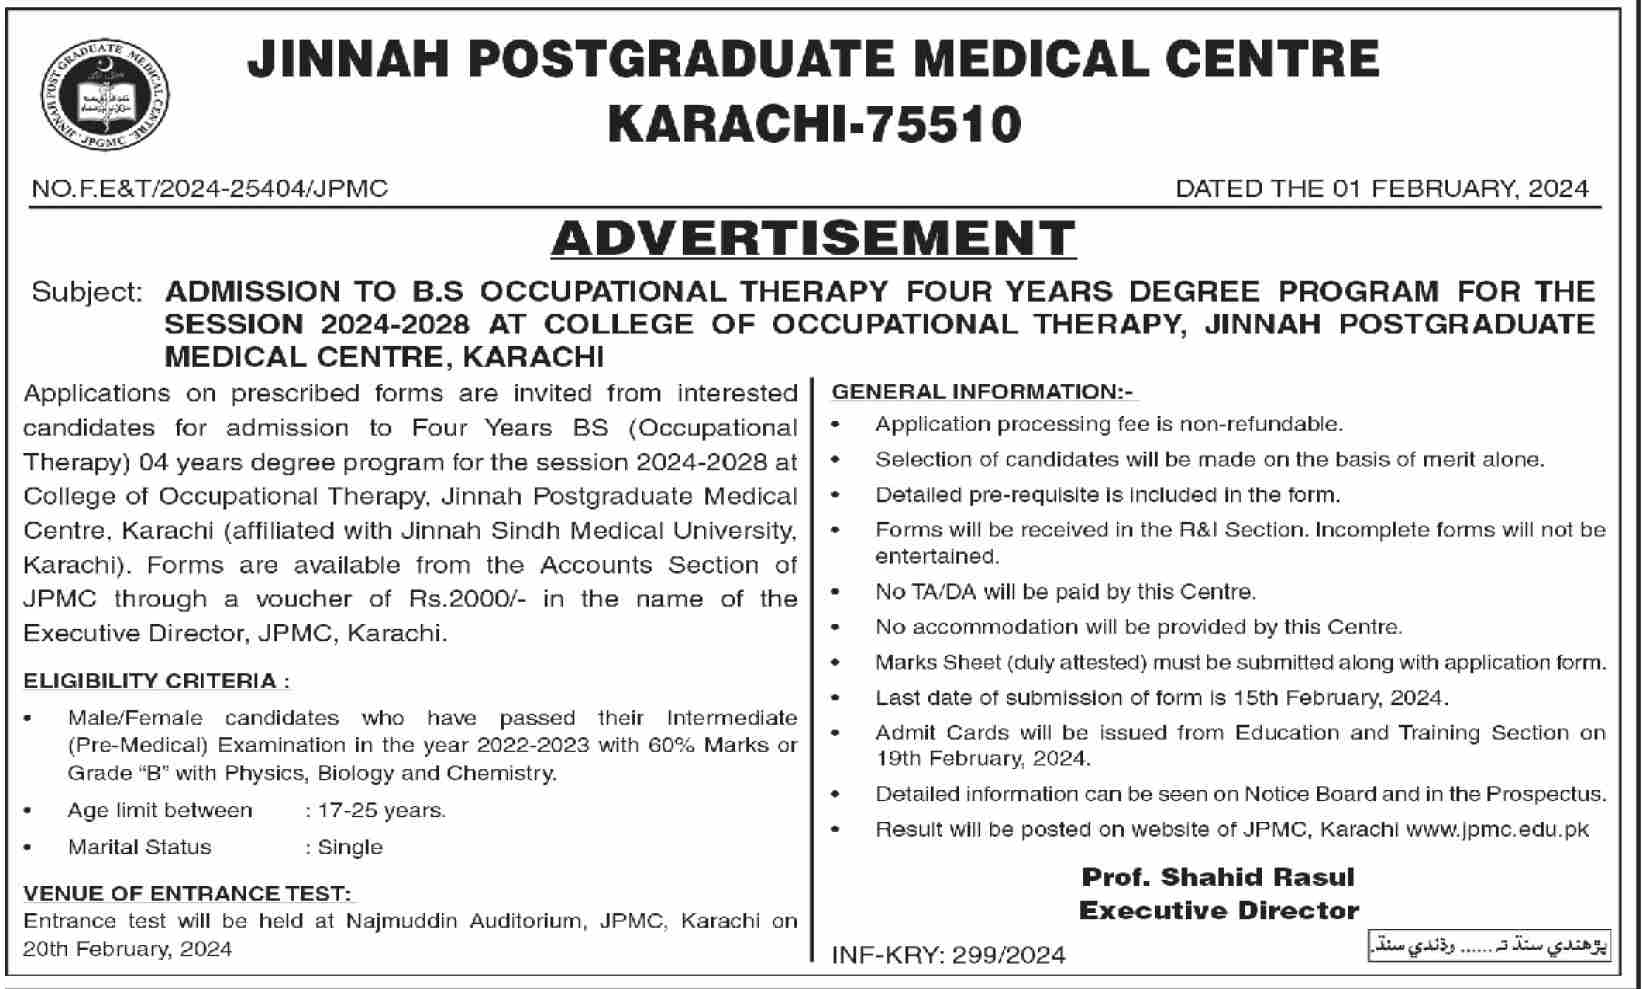 JPMC Karachi Admission BS Occupational Therapy 4 Year Degree Program Session 2024-2028